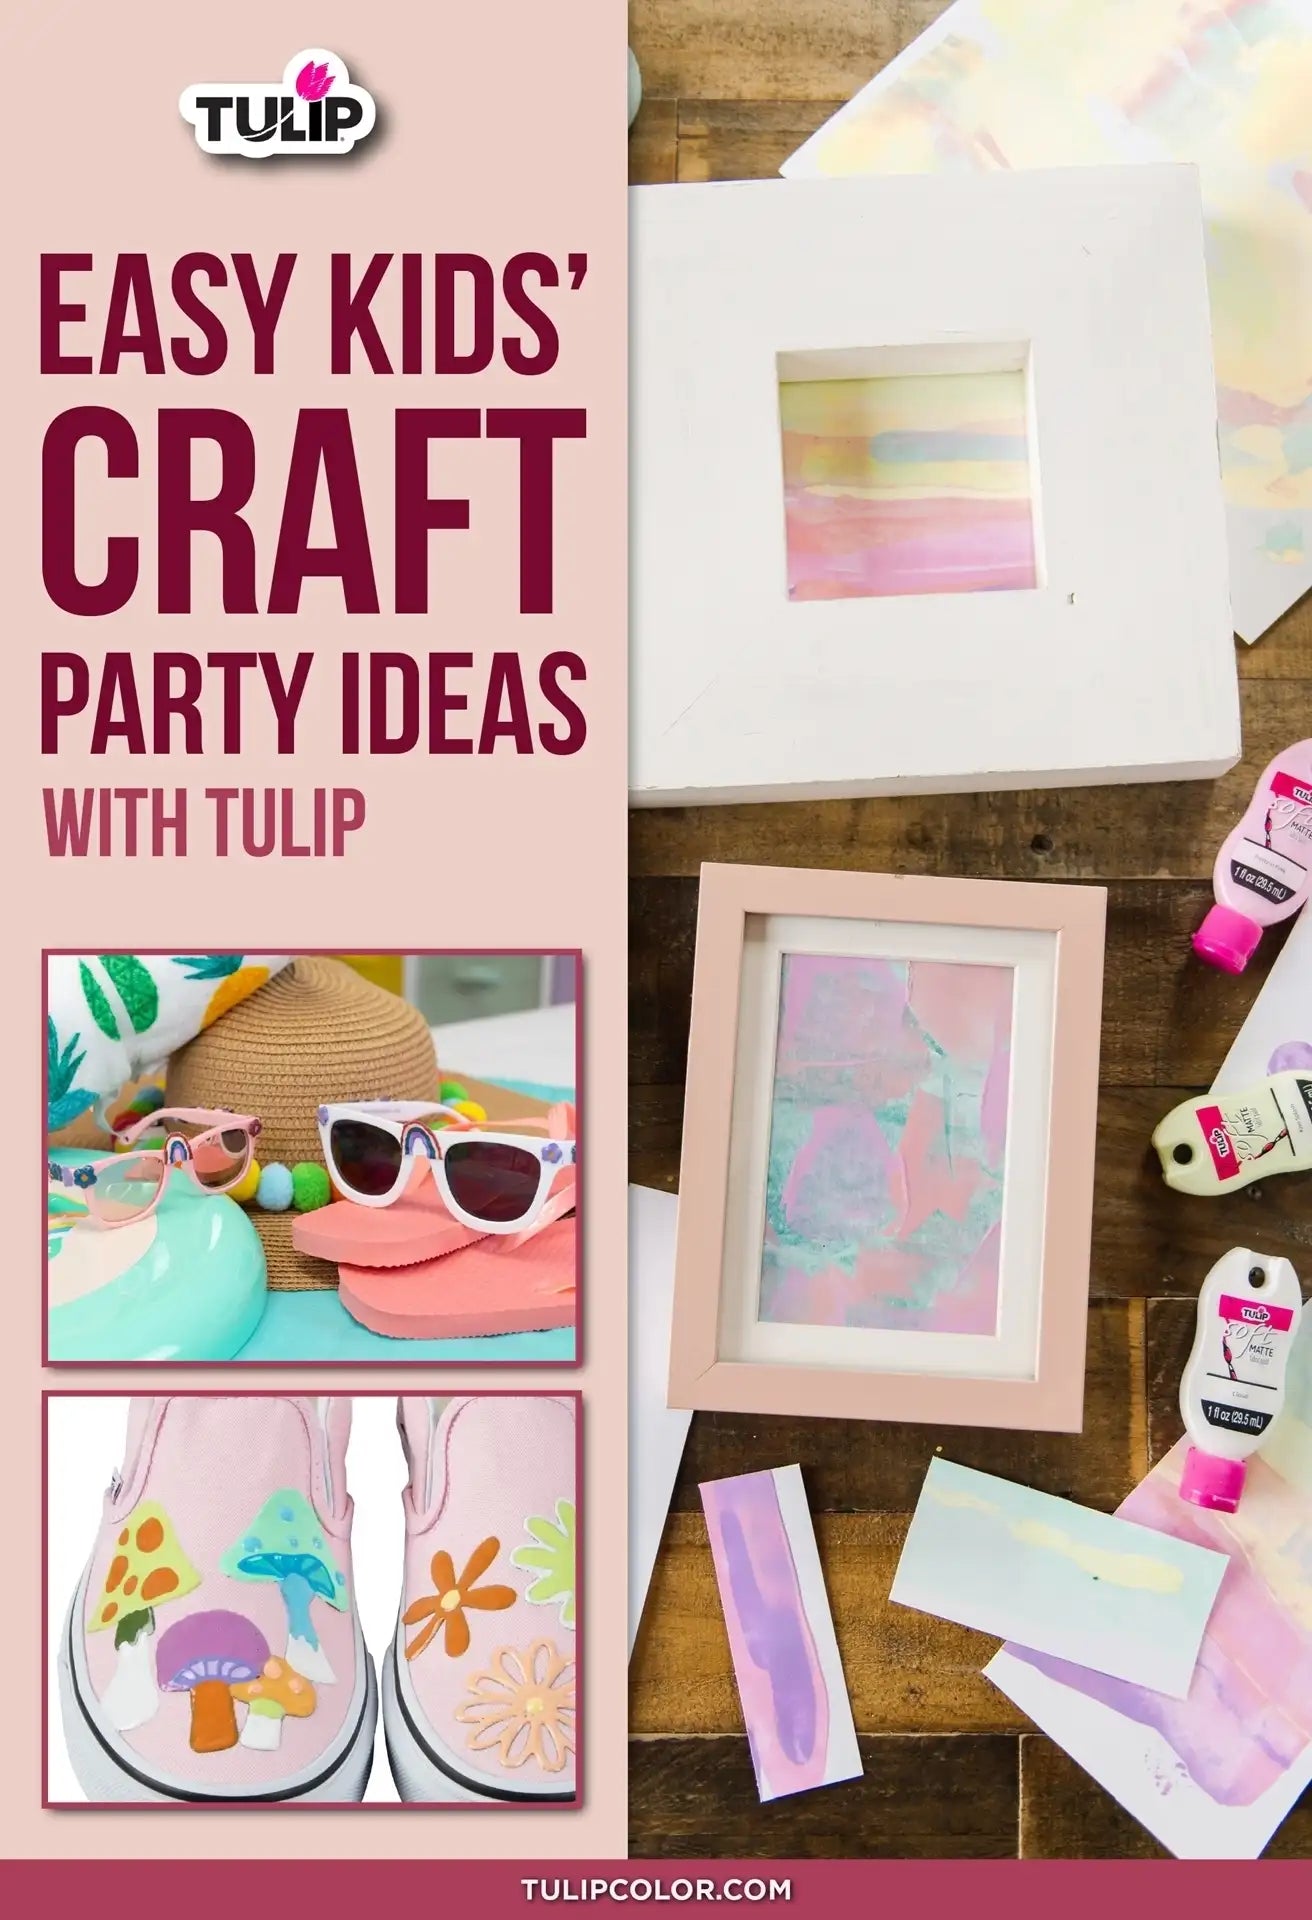 5 Easy Kids’ Craft Party Ideas to Try with Tulip